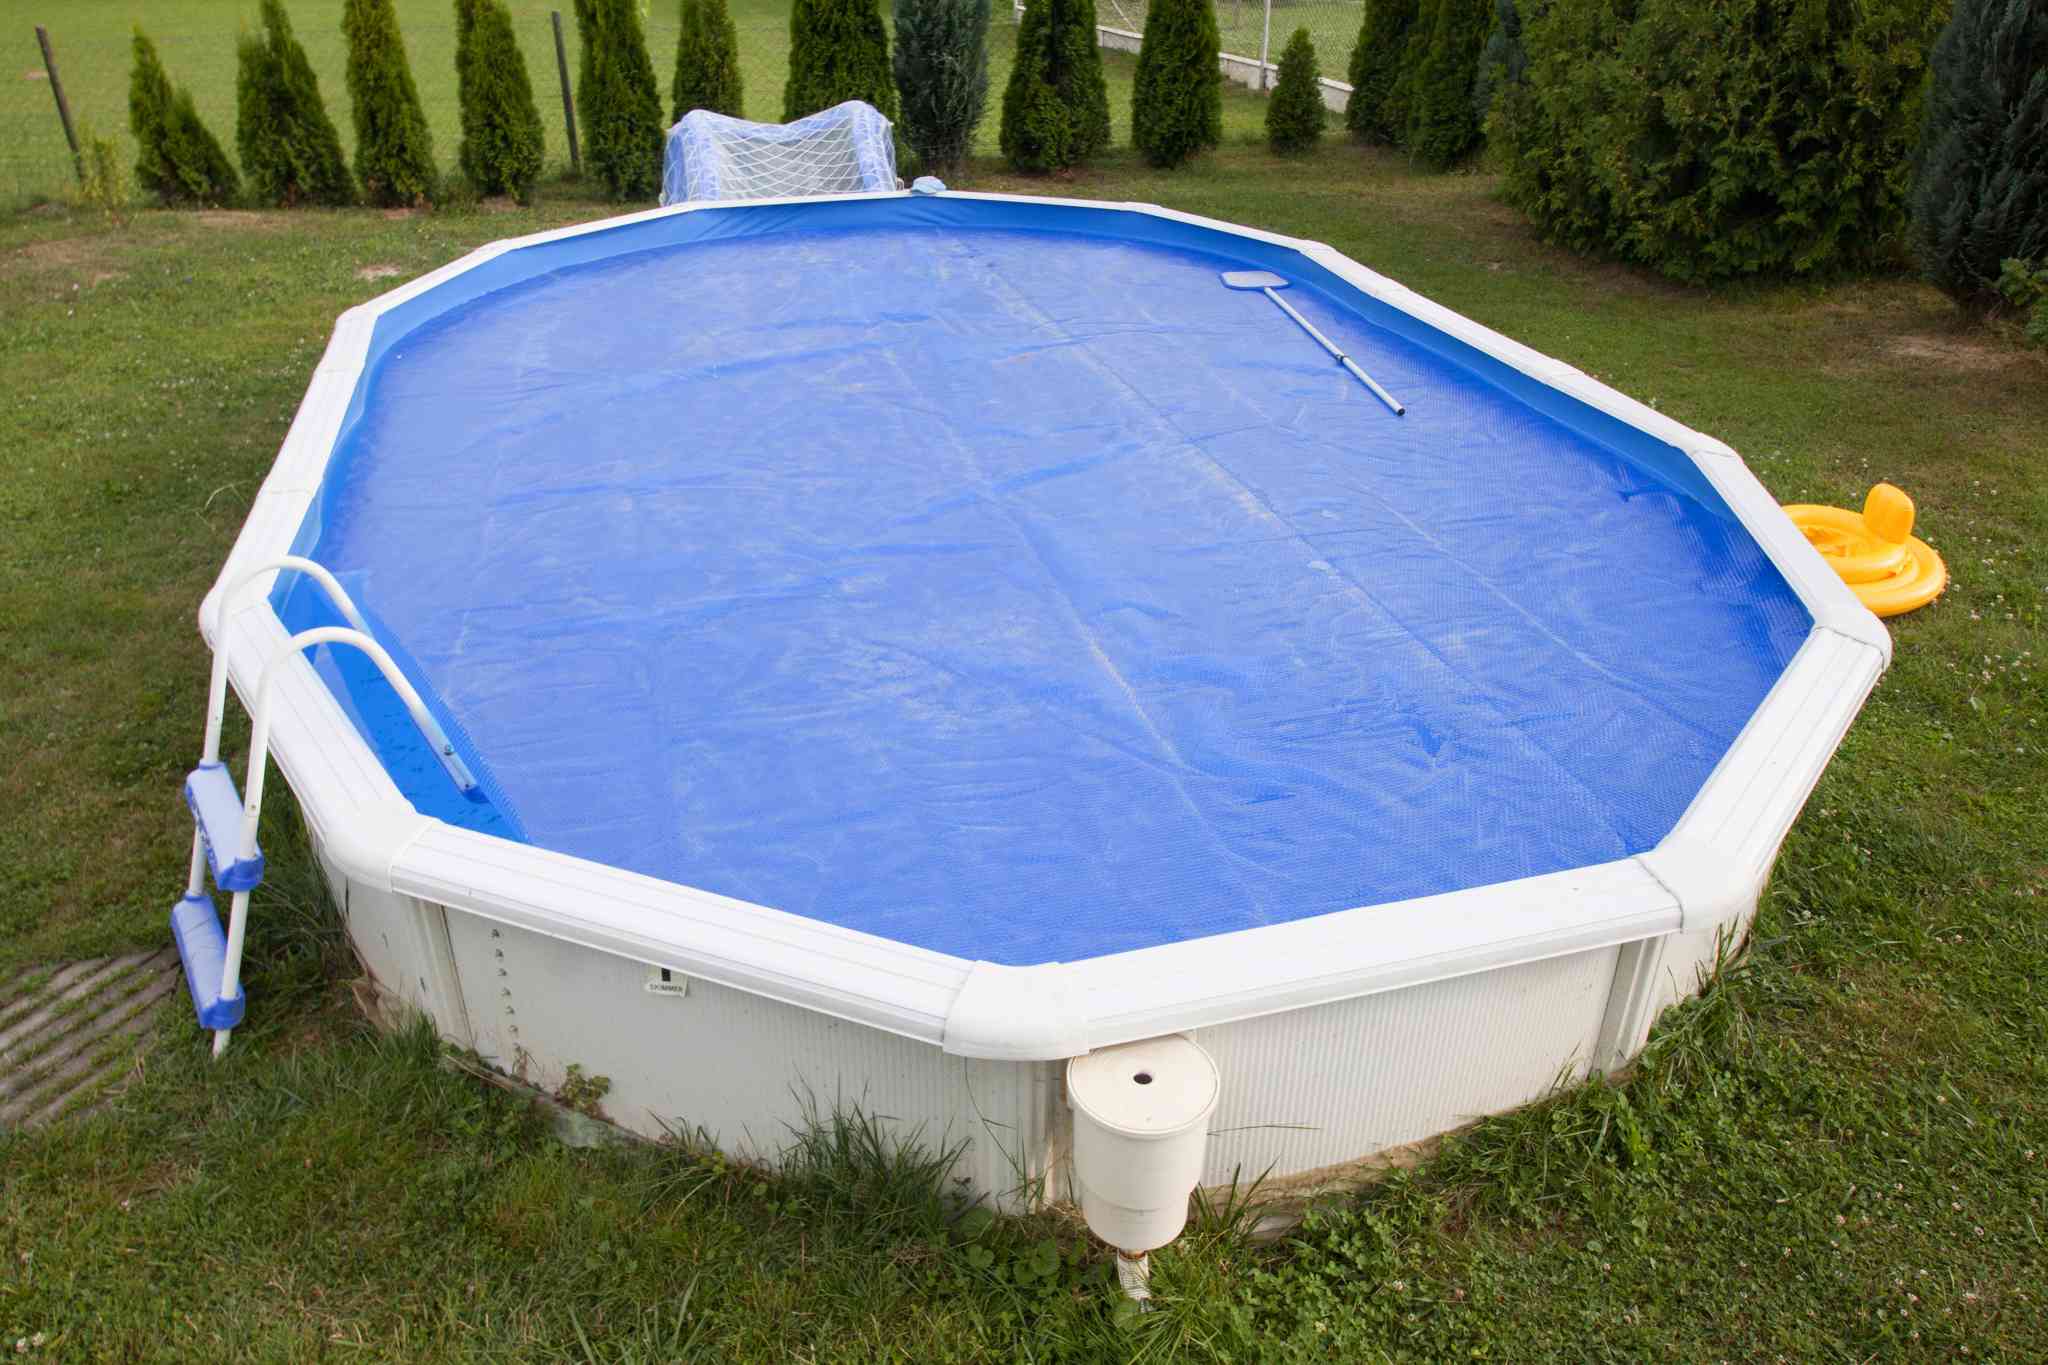 The Benefits Of Using A Pool Cover